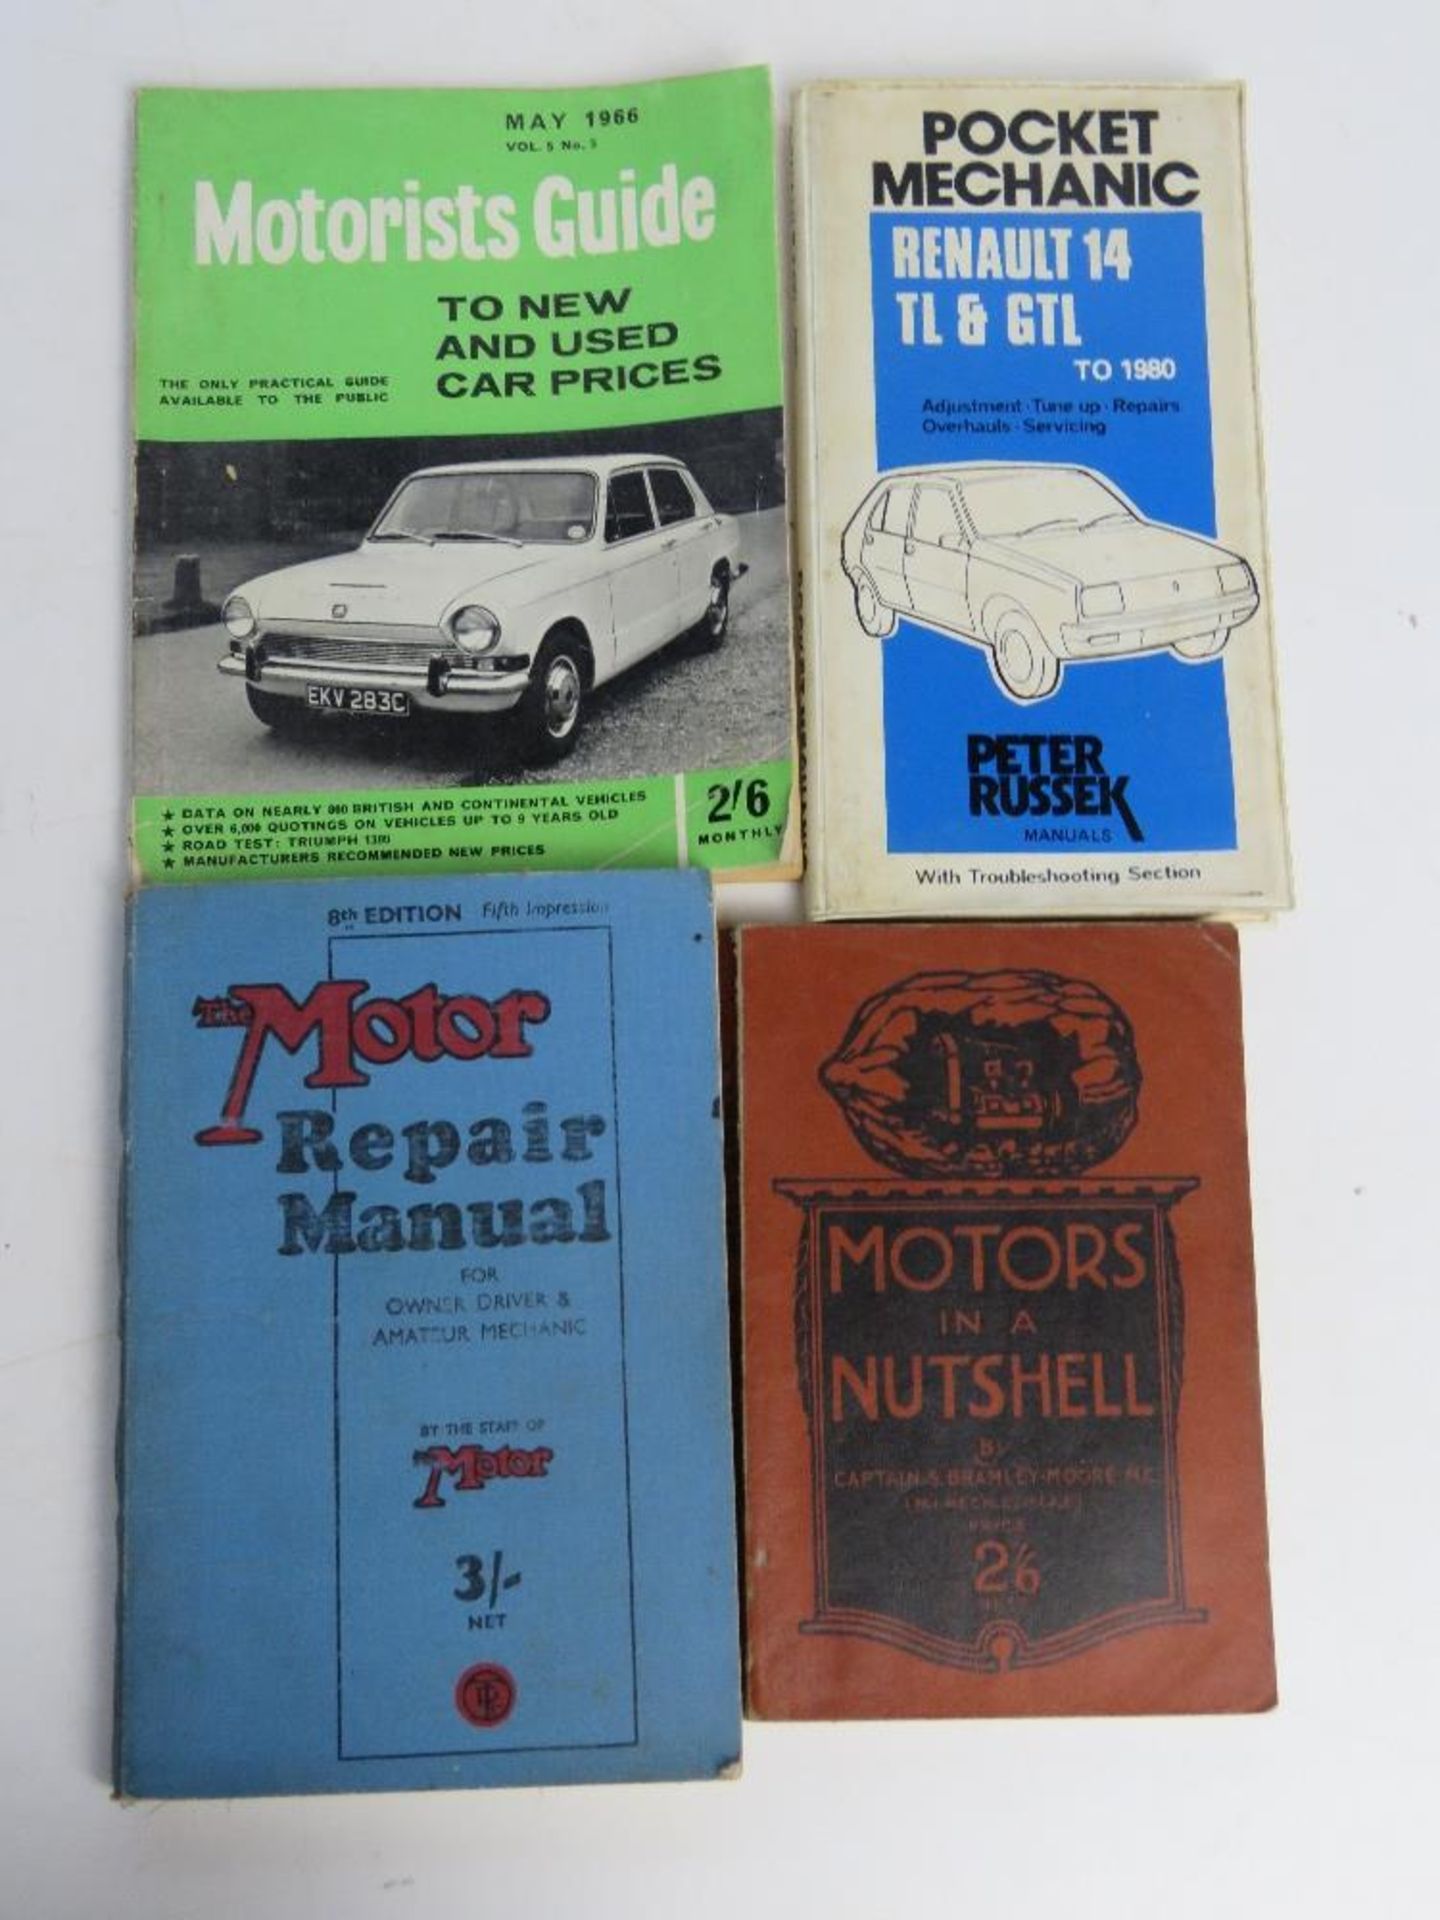 A 1966 Motorists Guide together with Motors in a Nutshell book,